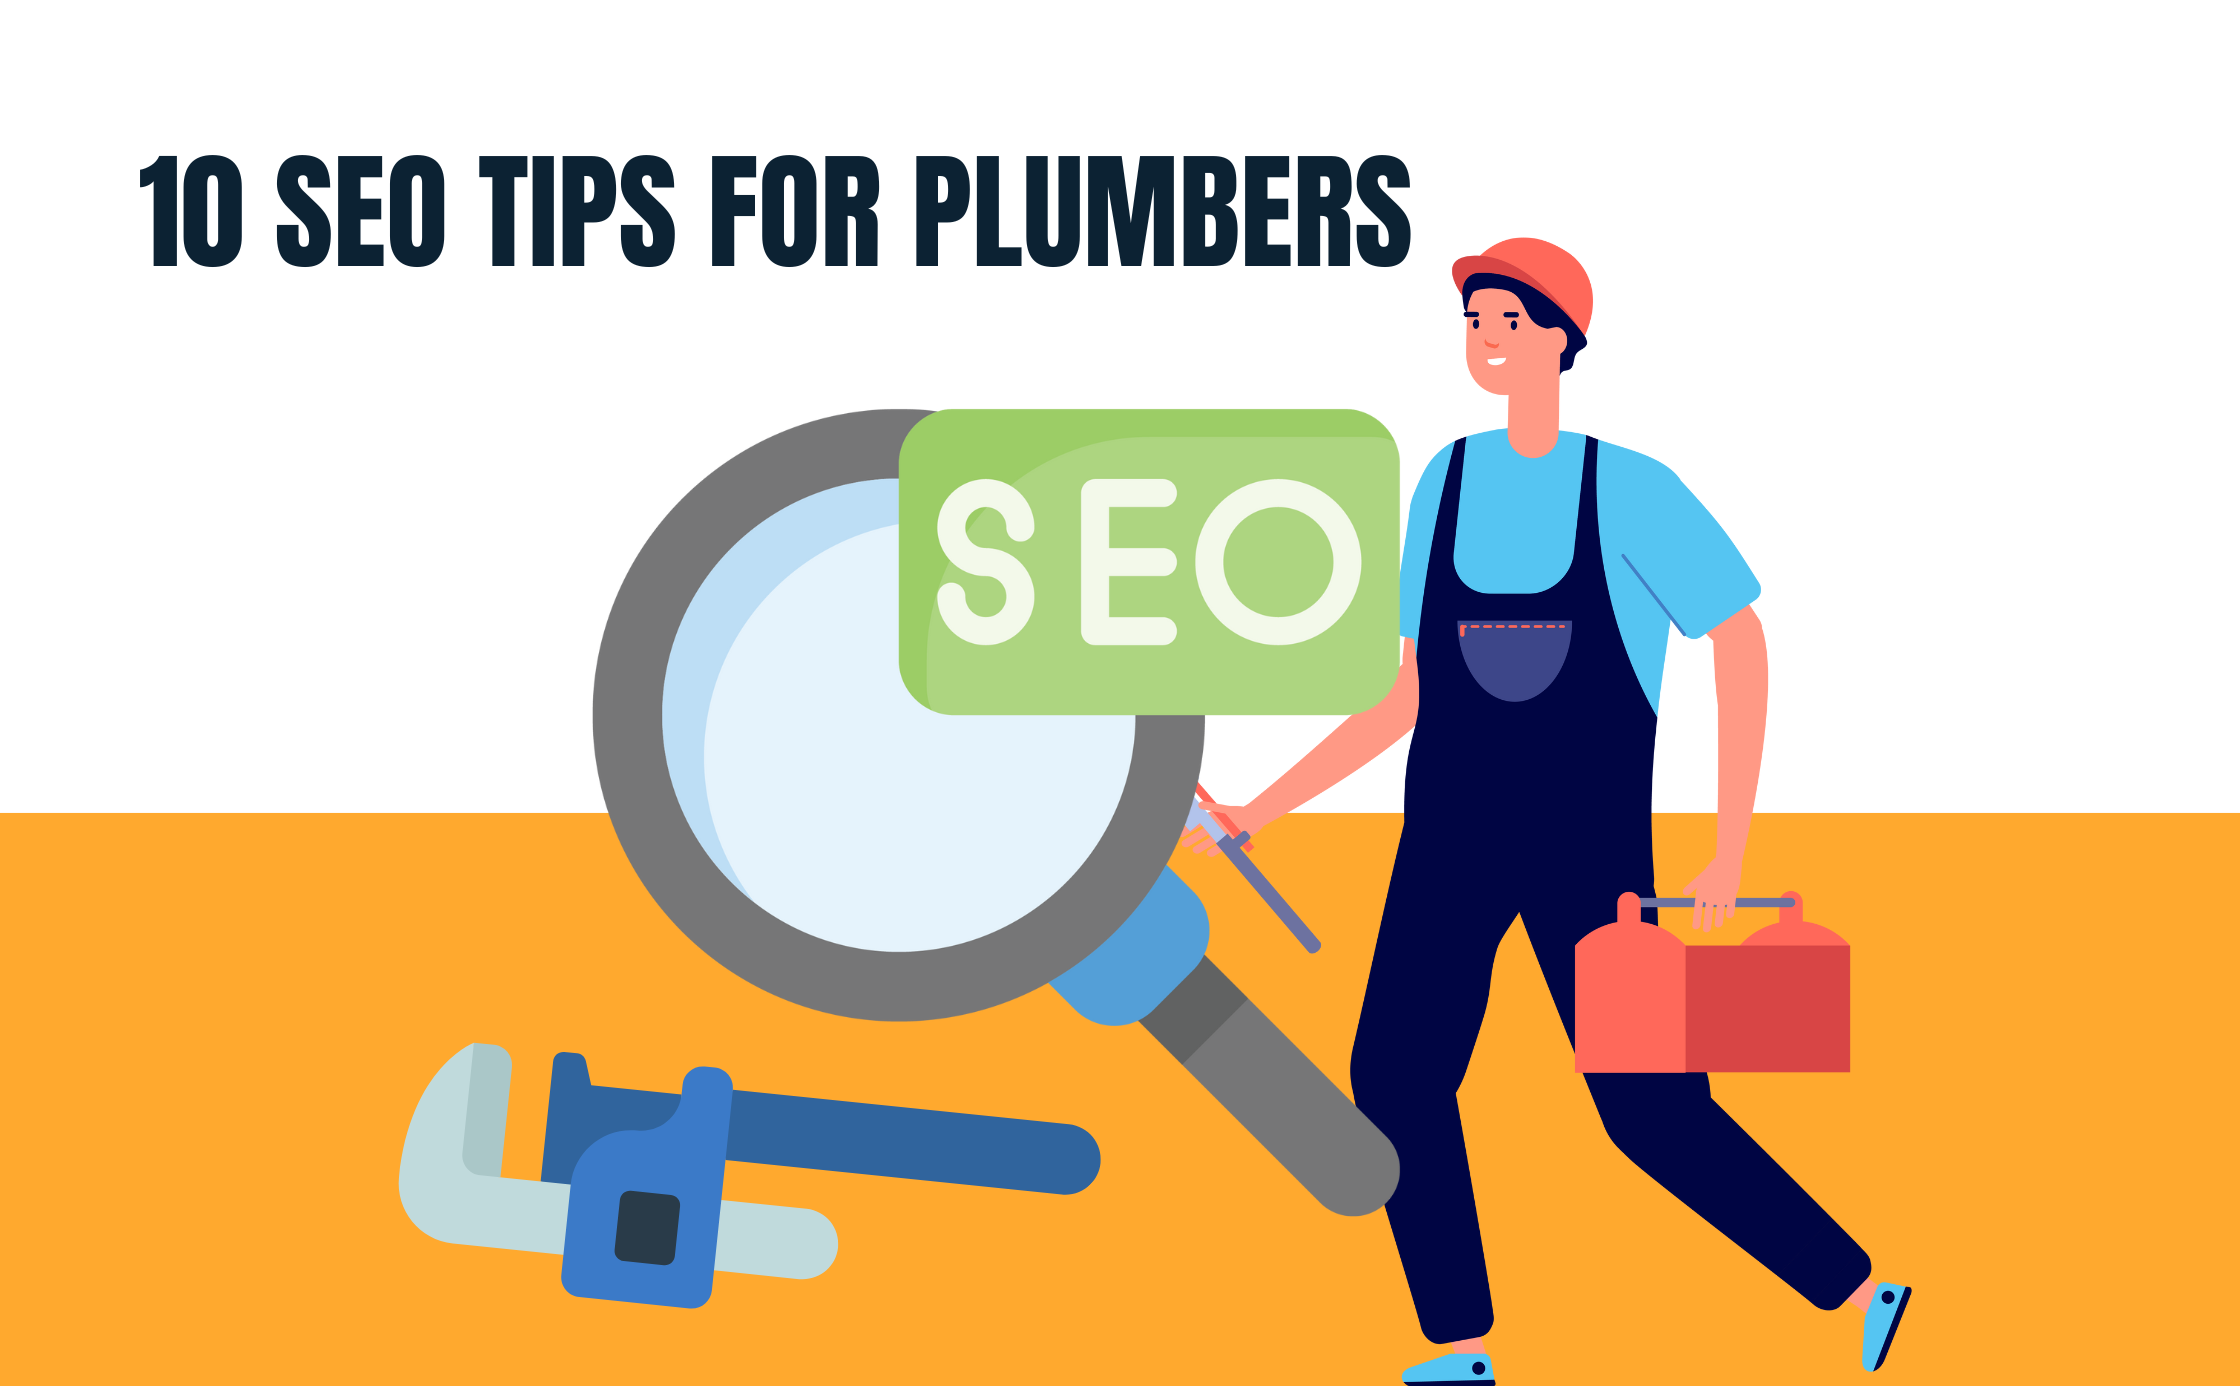 Plumbing SEO: 10 Essential SEO Tips for Plumbers to Boost Online Presence